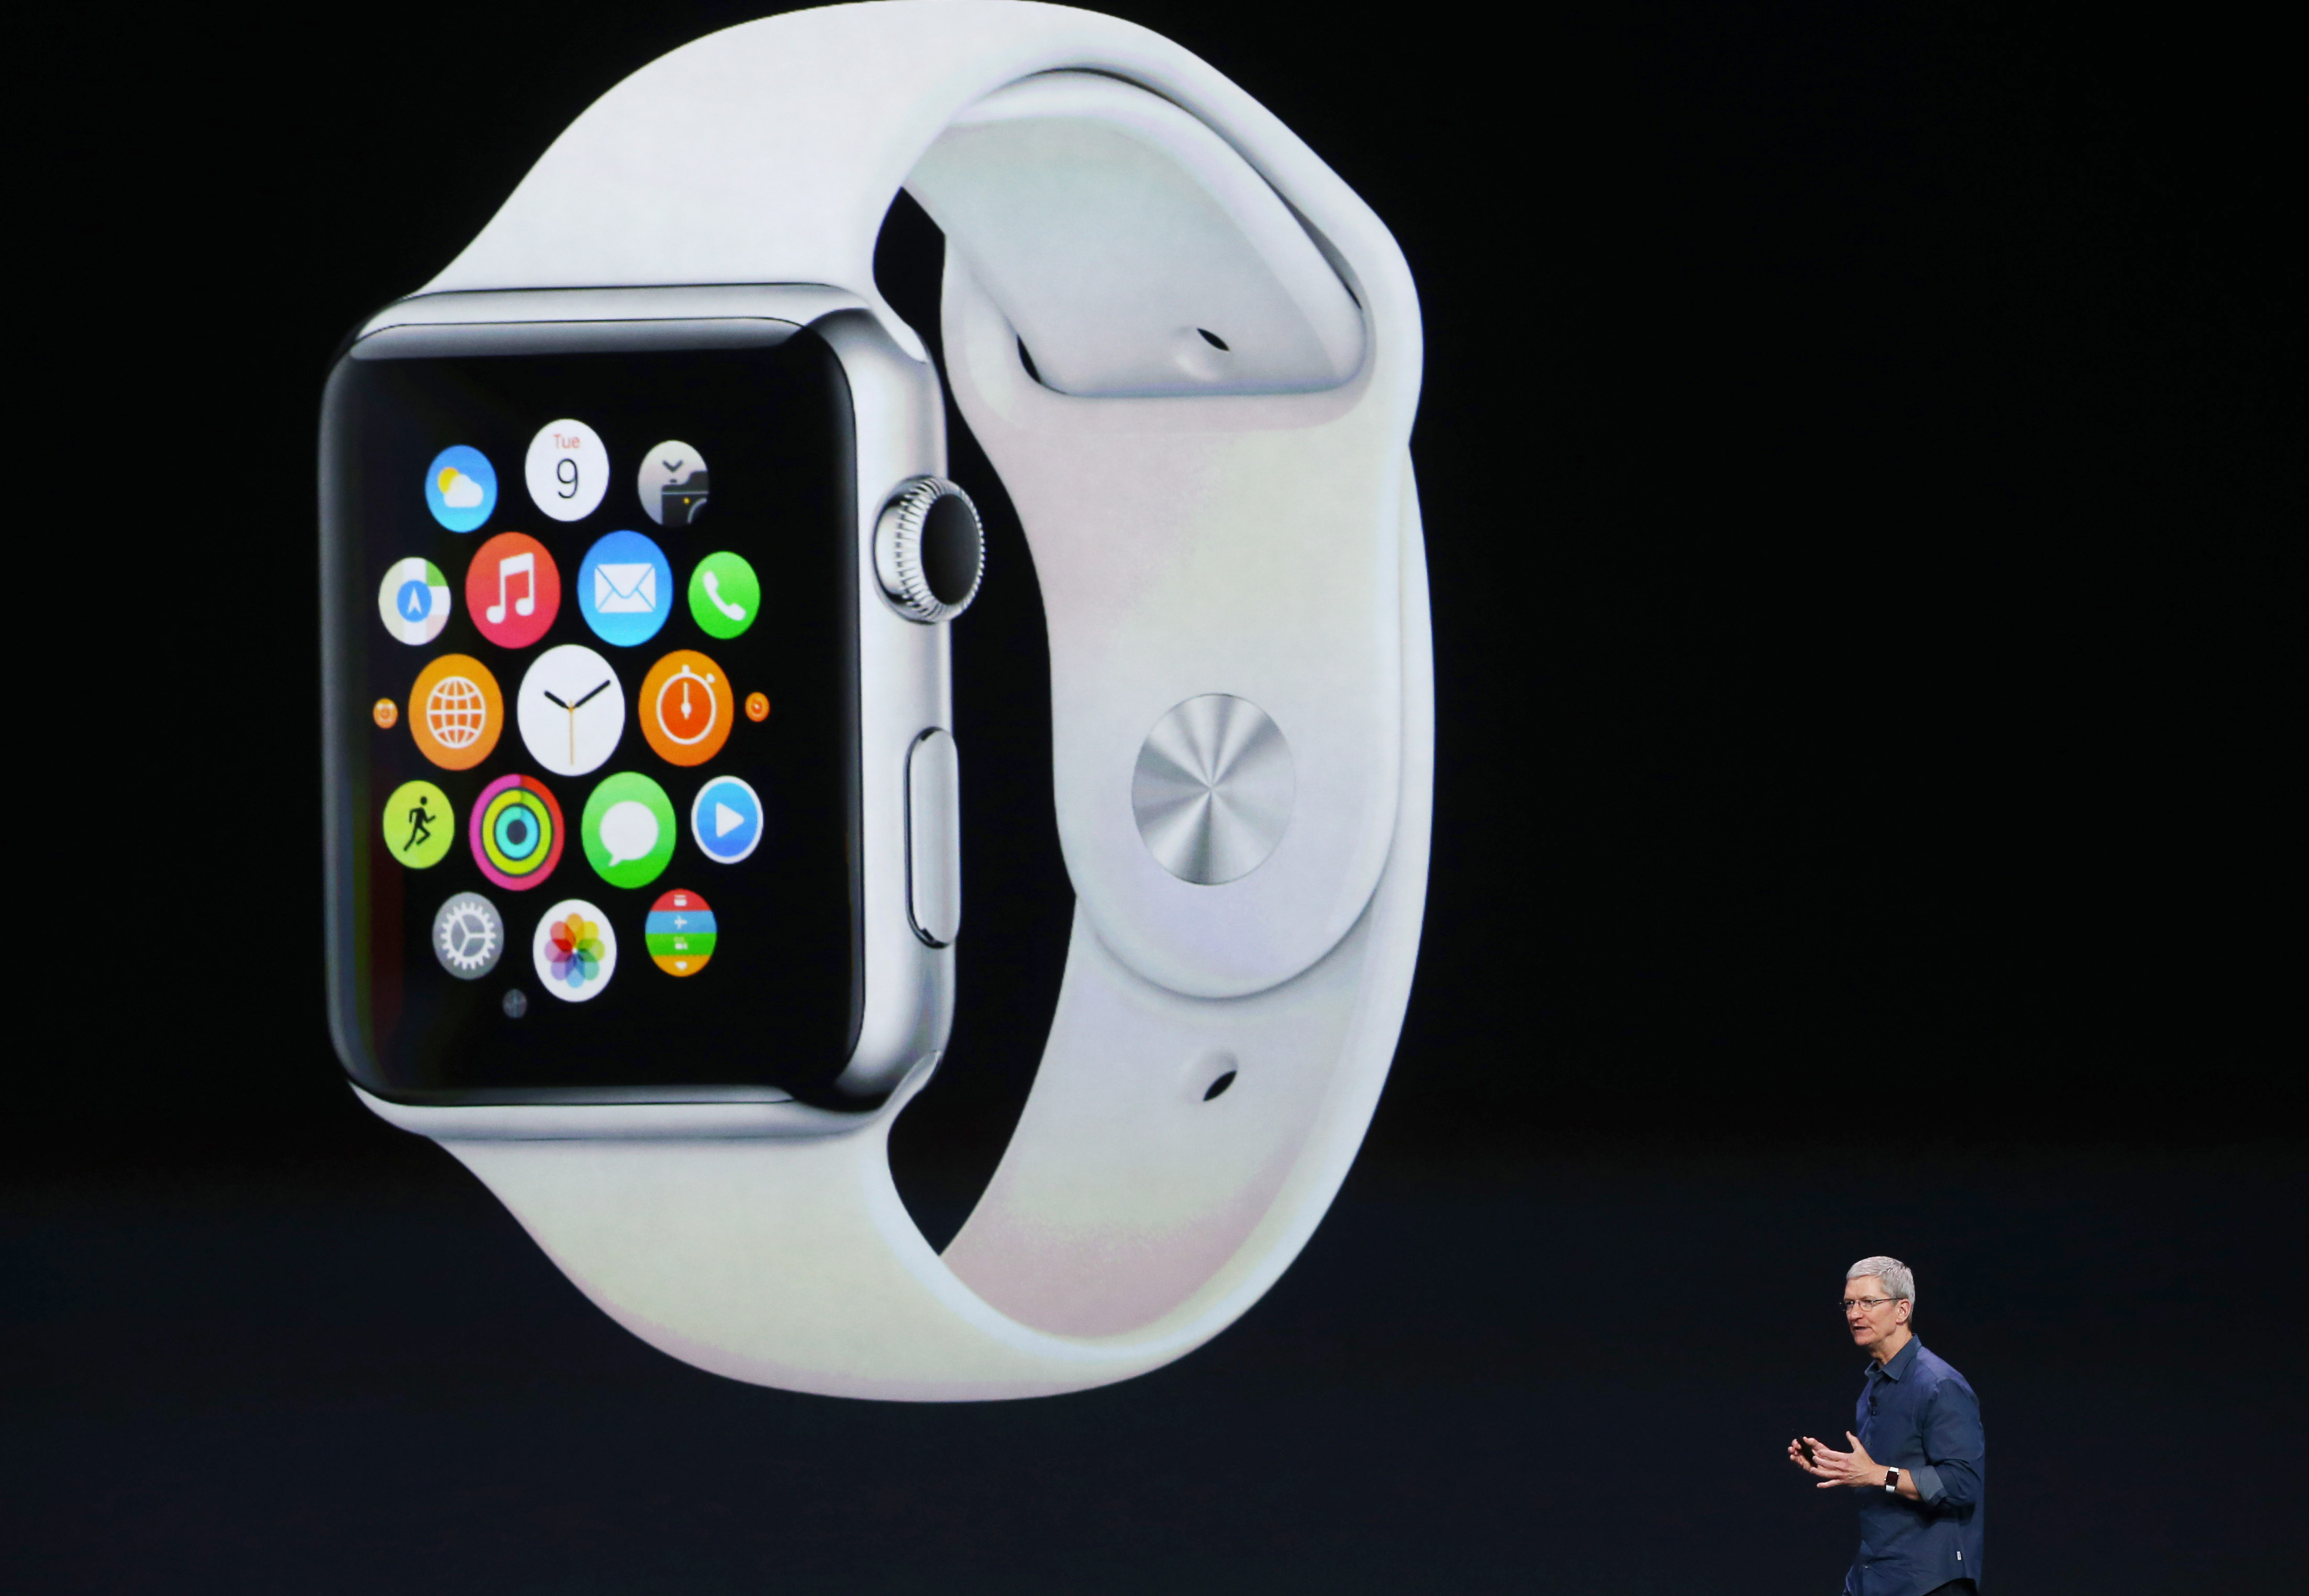 Apple CEO Tim Cook announces the Apple Watch during an Apple special event in Cupertino, Calif. on Sept. 9, 2014. (Justin Sullivan—Getty Images)